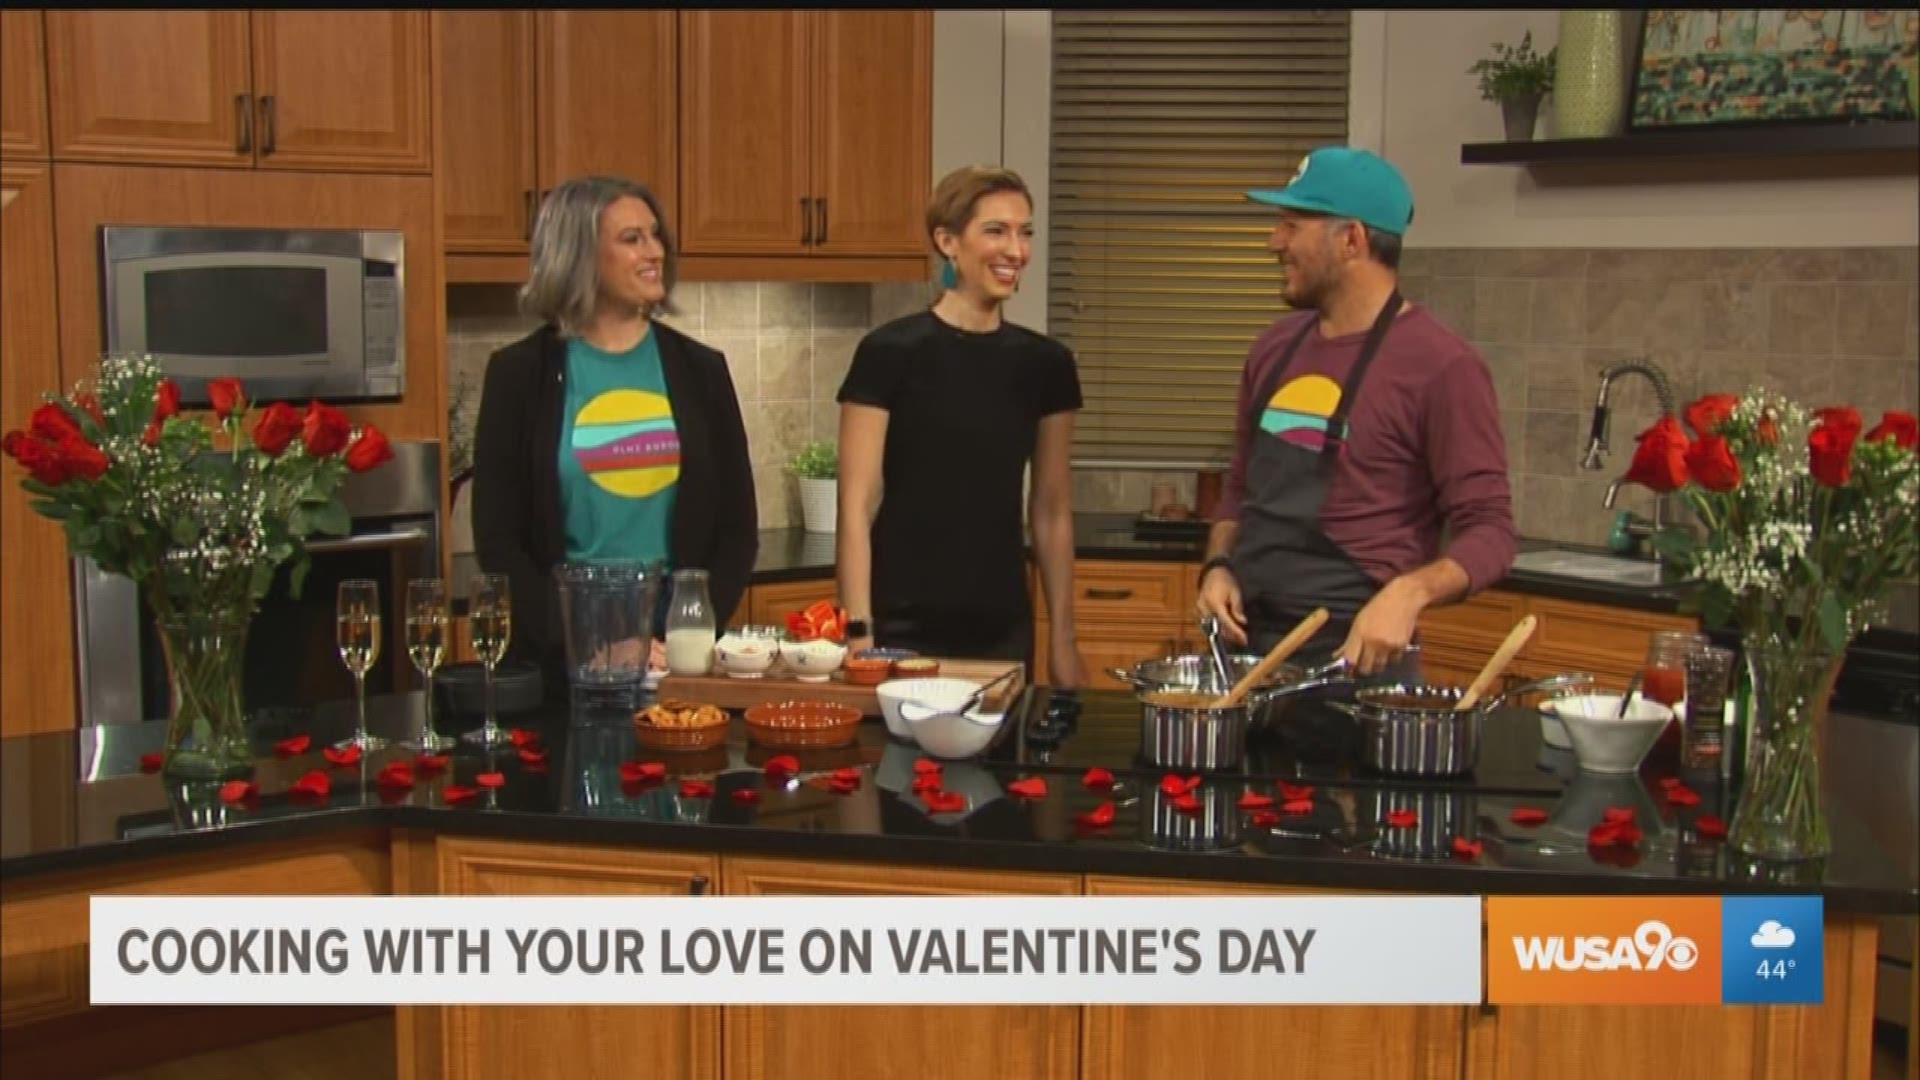 Celebrity chef, Spike Mendelsohn and his wife Cody share their love for cooking together and a cozy dish they like on Valentine's Day.